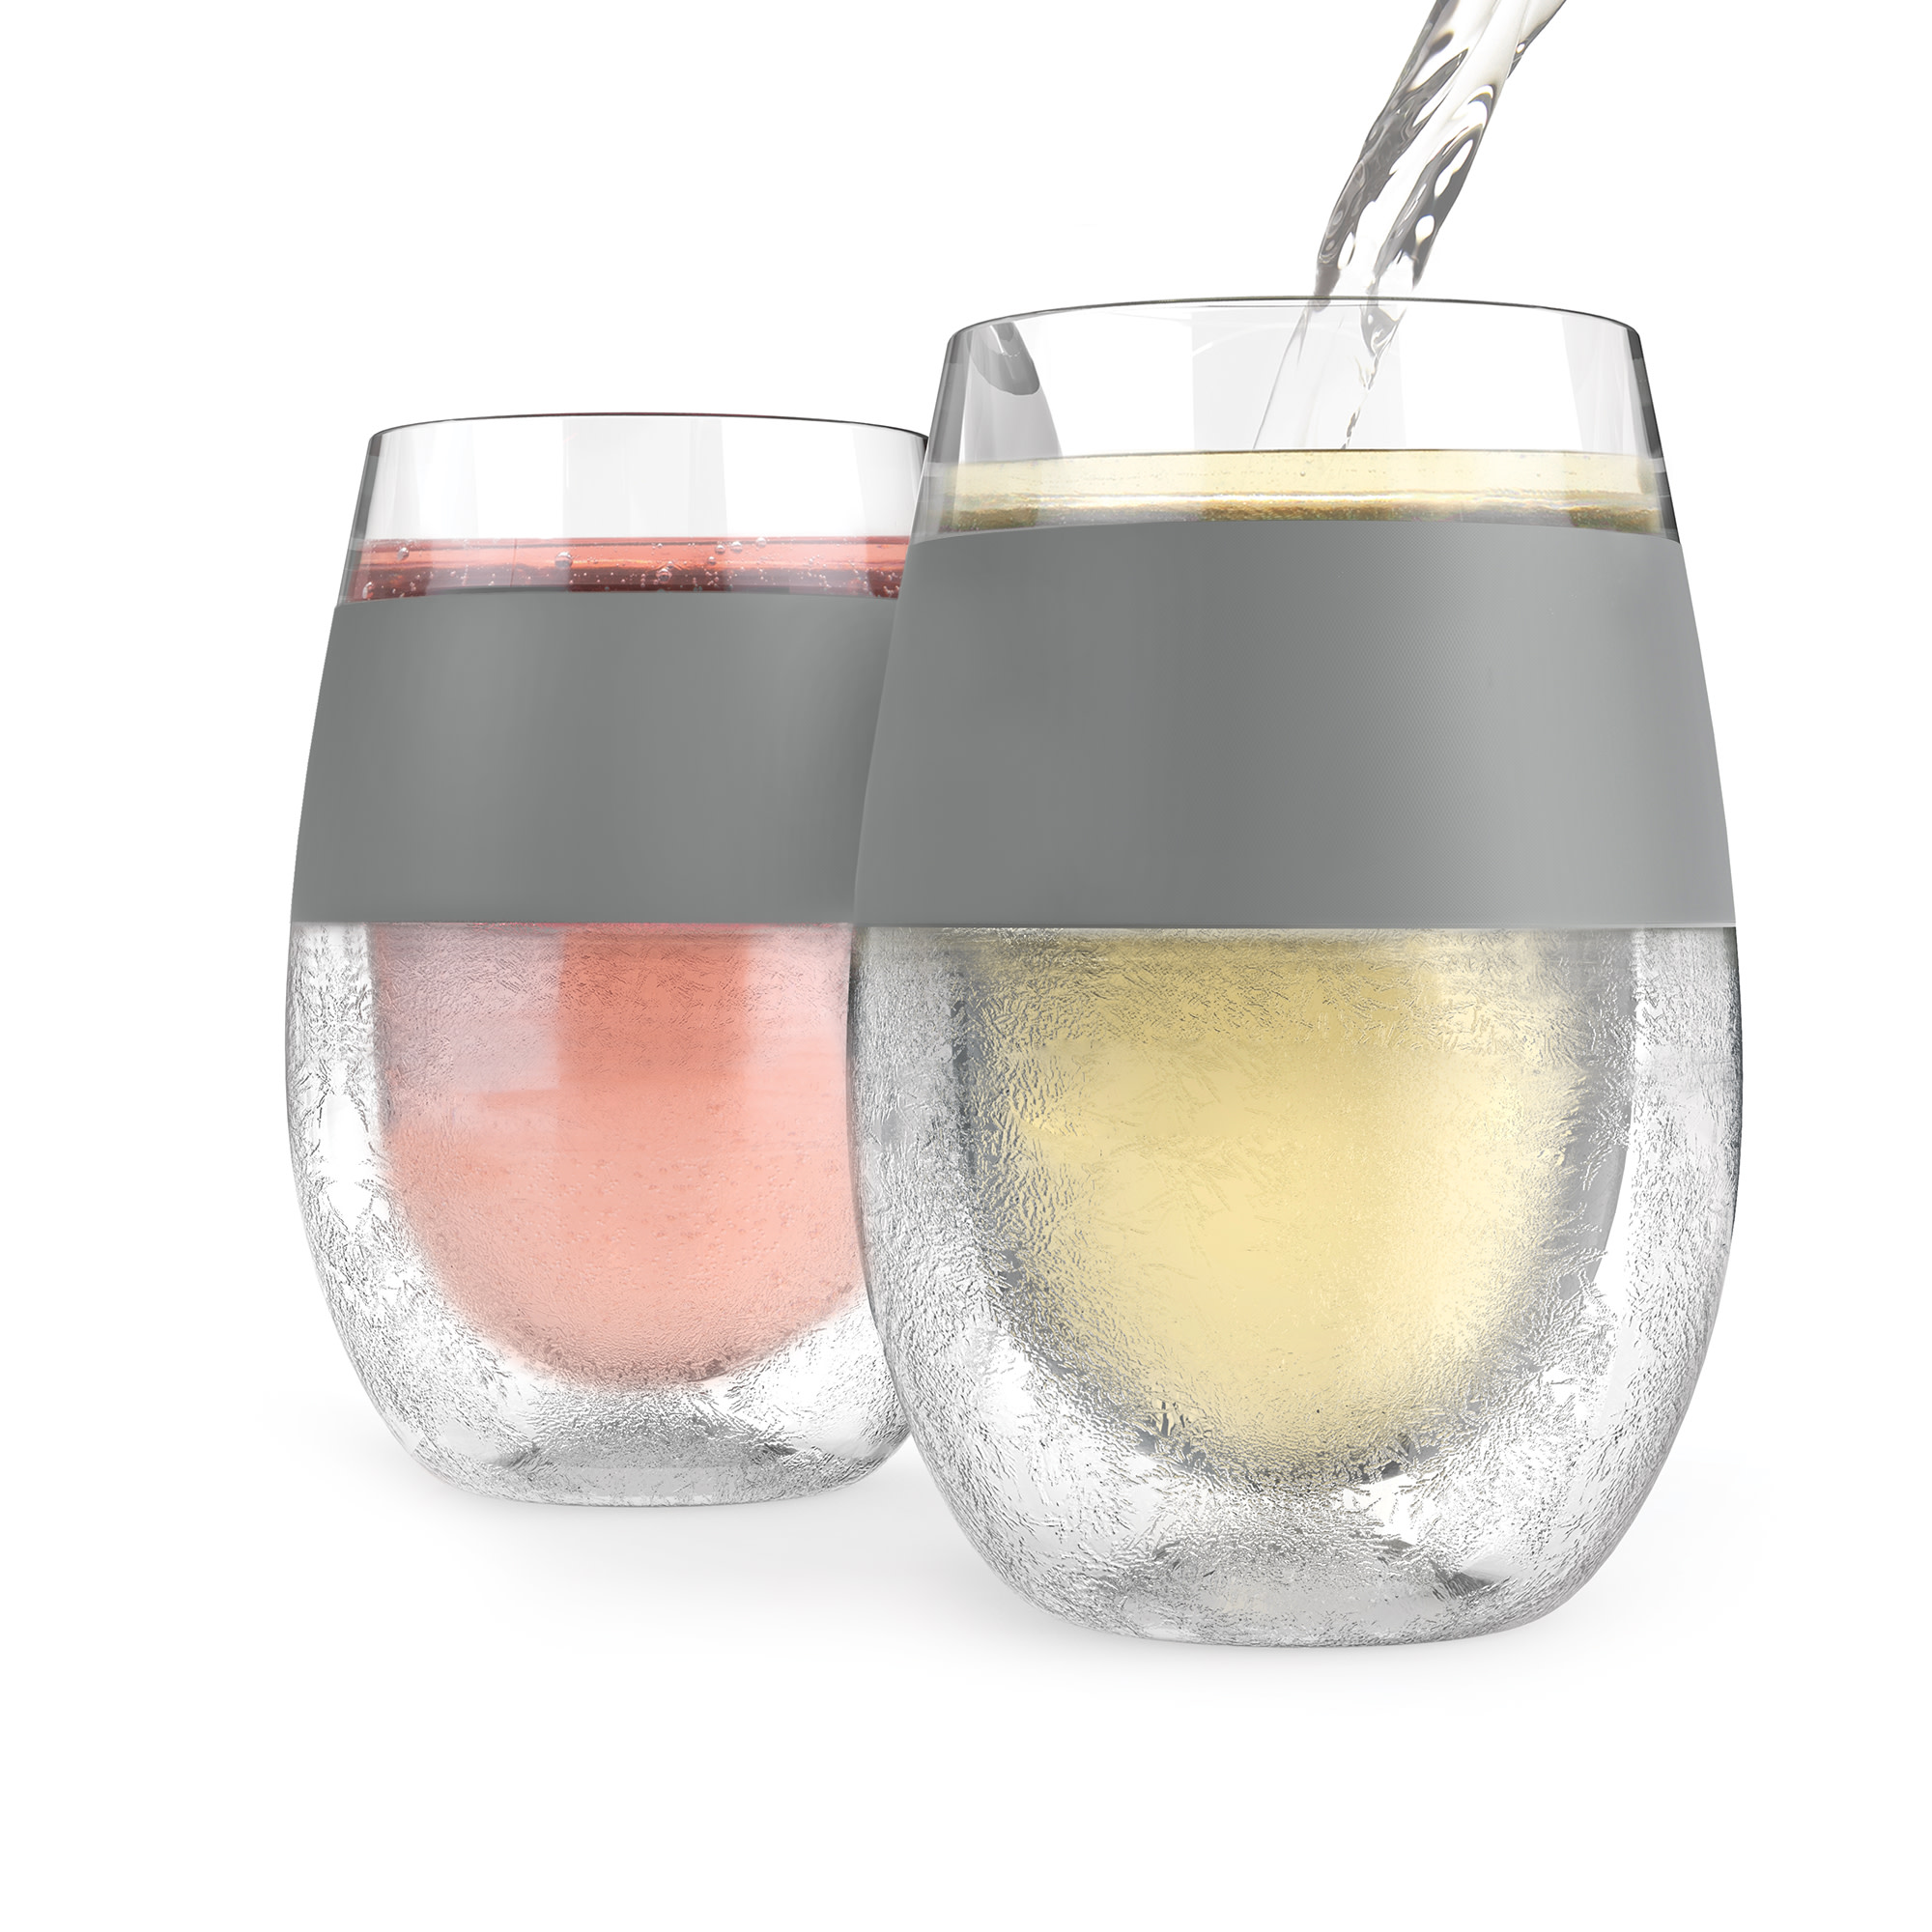 Host Plastic Double Wall Insulated Wine Freeze Cup Set - Wine Glass, 8.5 oz Grey - image 1 of 26